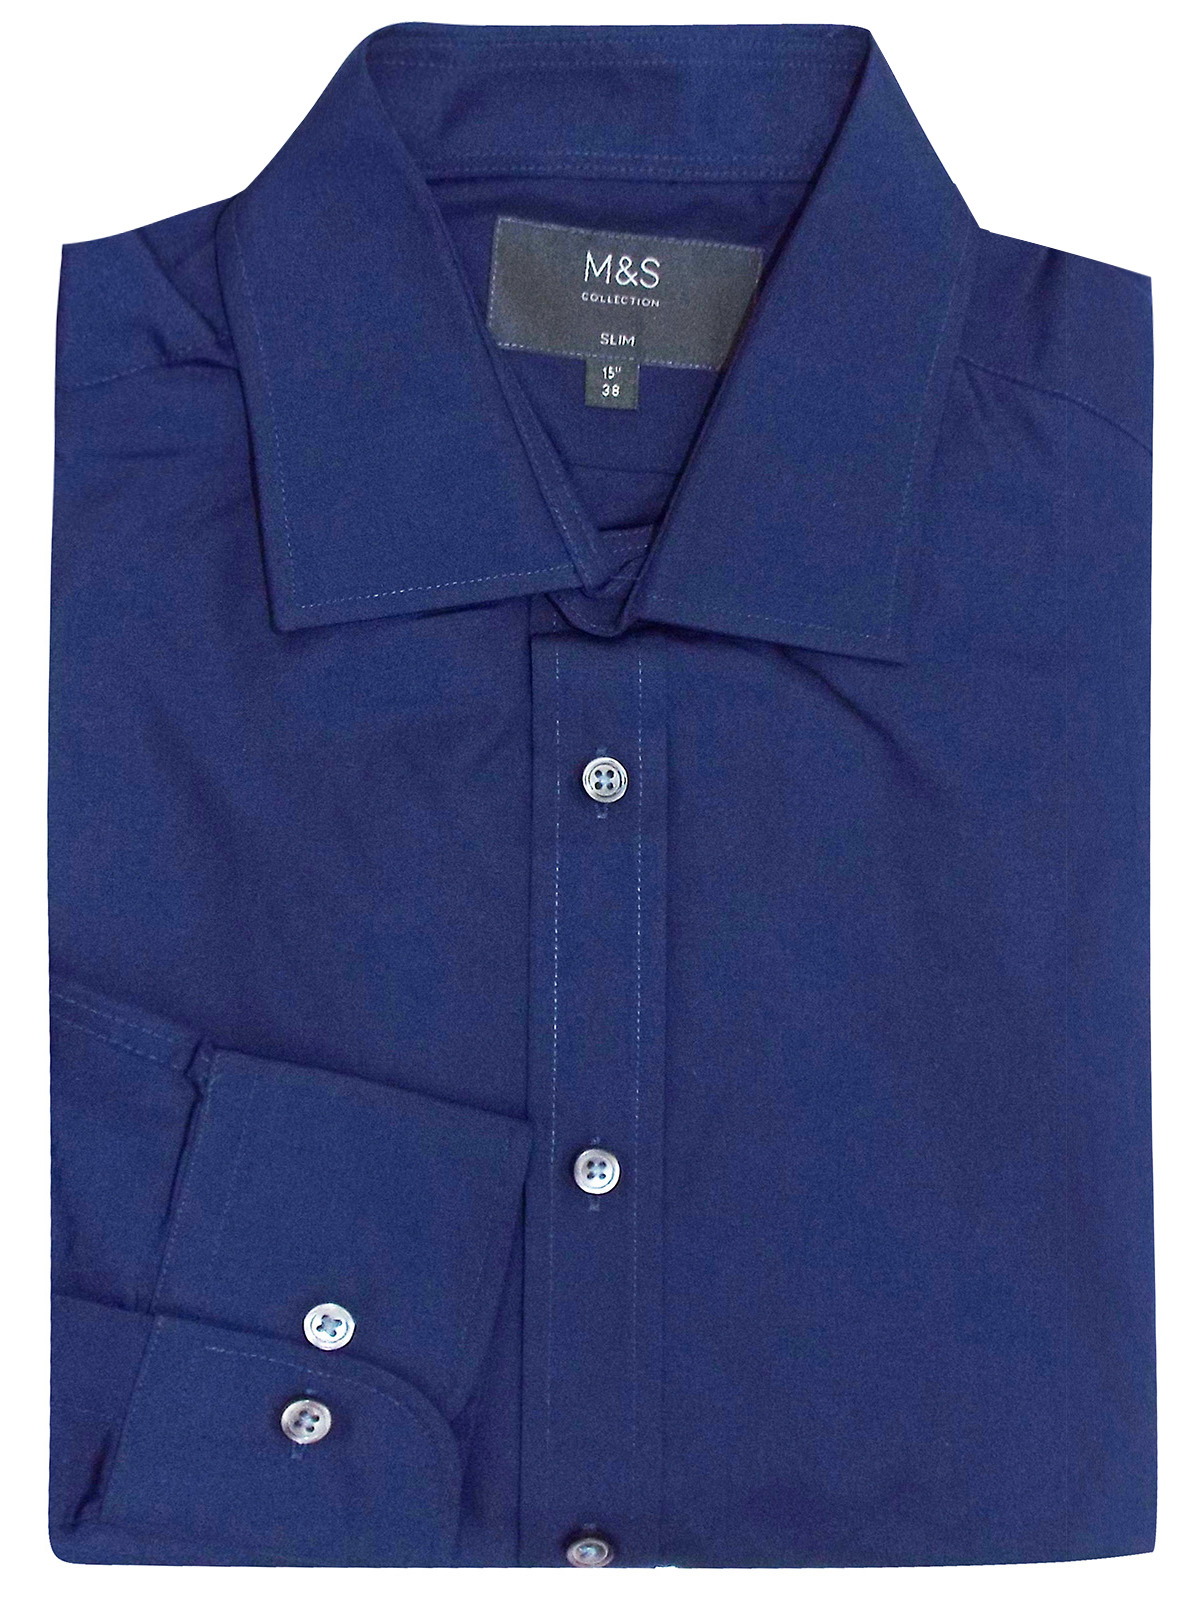 Marks and Spencer - - M&5 NAVY Pure Cotton Slim Fit Shirt - Collar Size ...